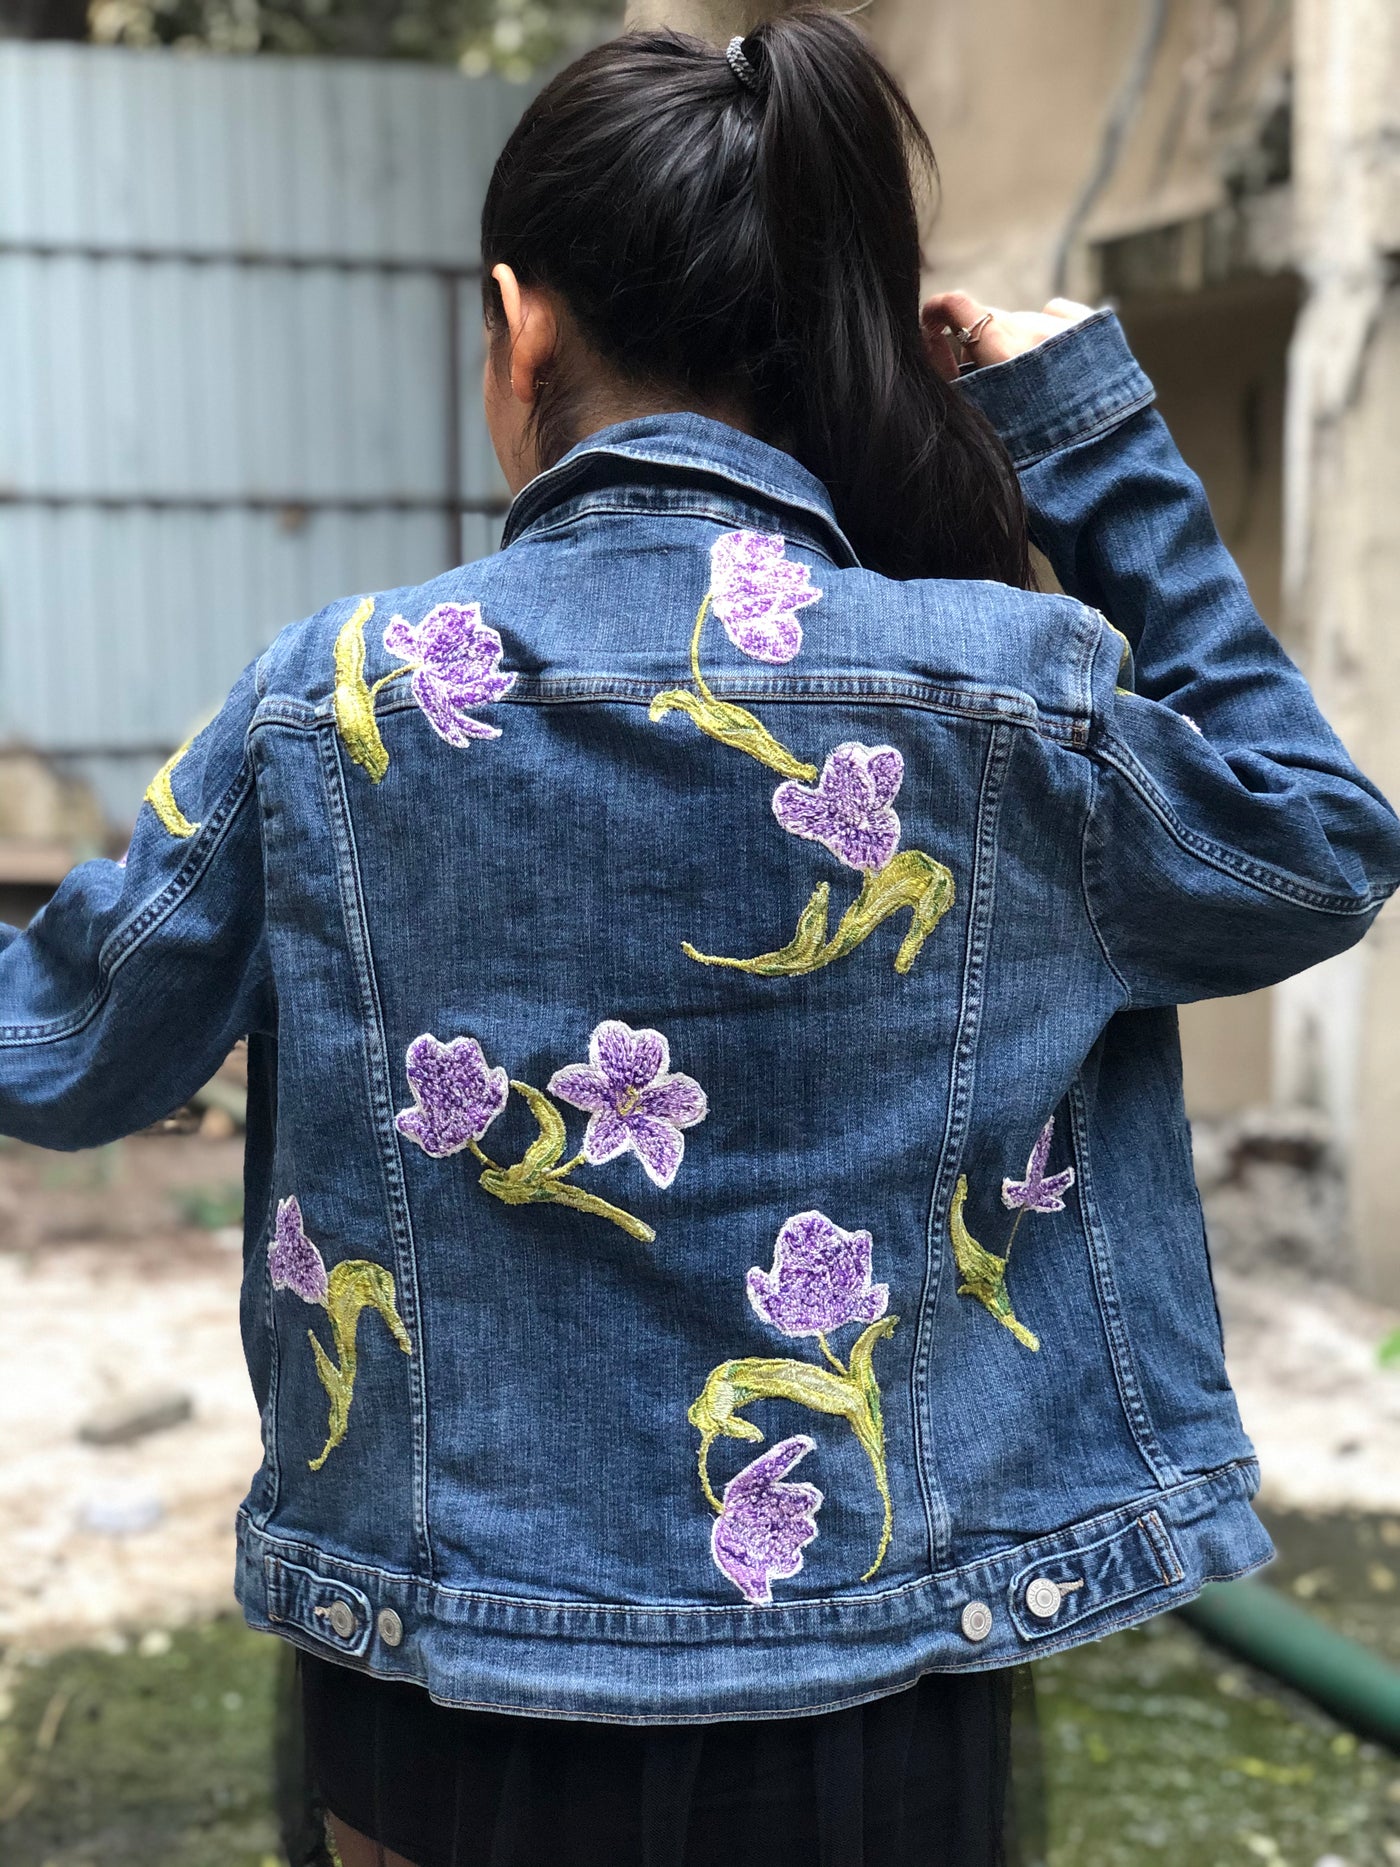 Embroidered purple flower jean jacket is inspired by the spring blooms